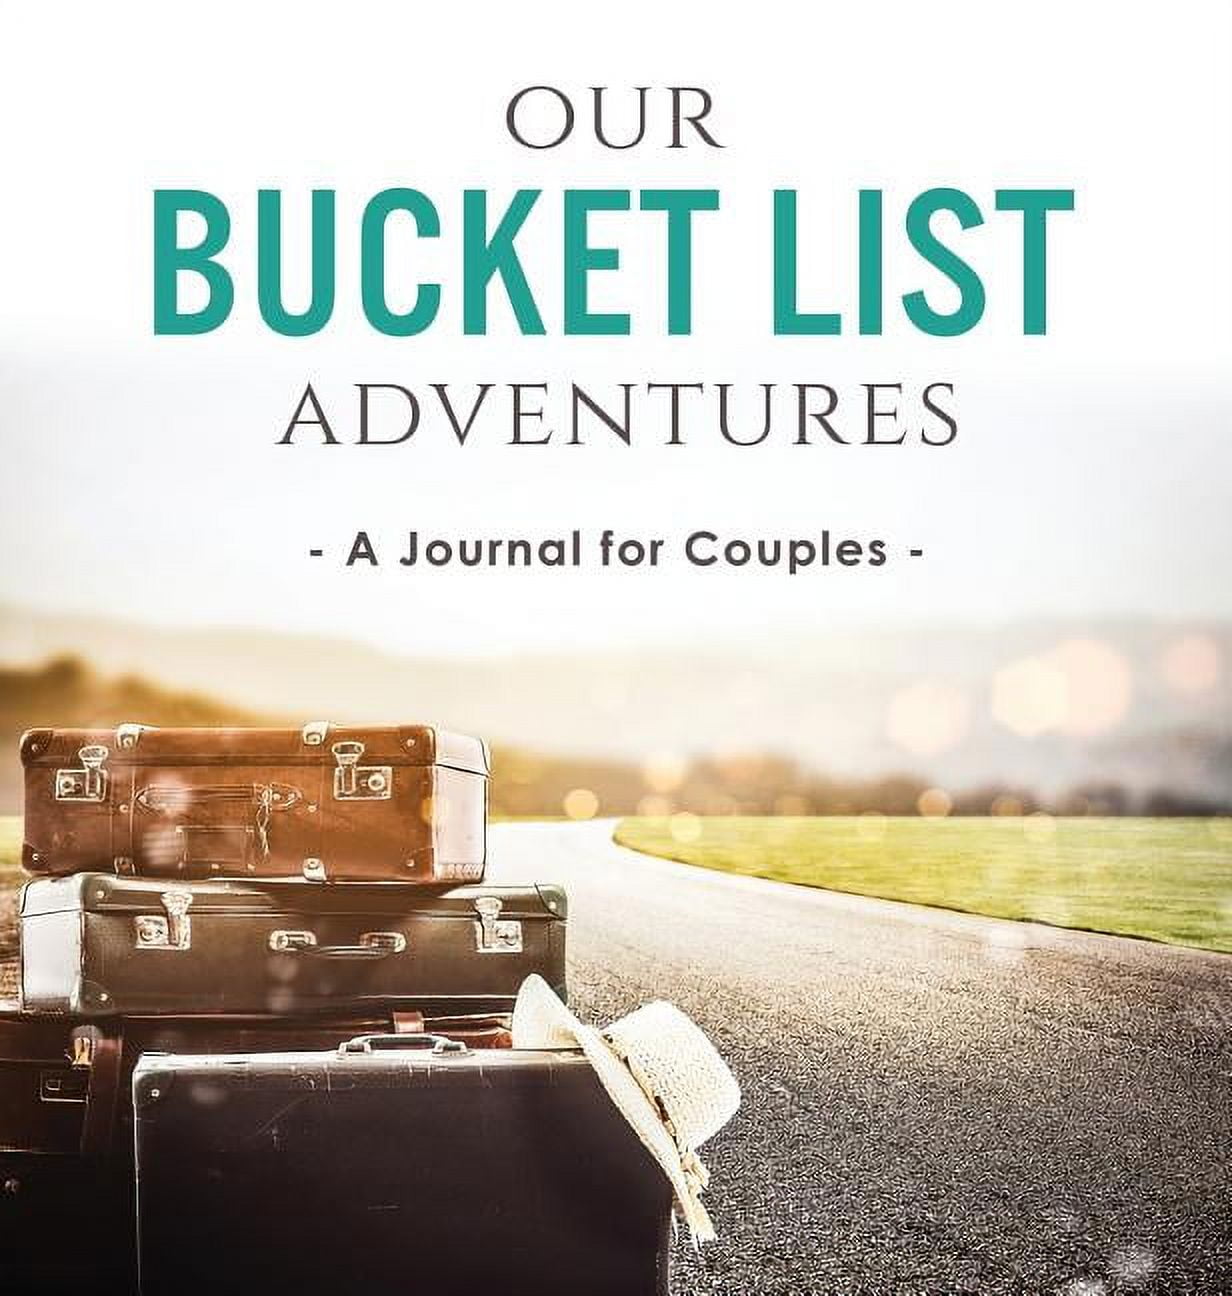 Snapshots of Our Life [Video] [Video]  Bucket list book, Life, Couples  challenges